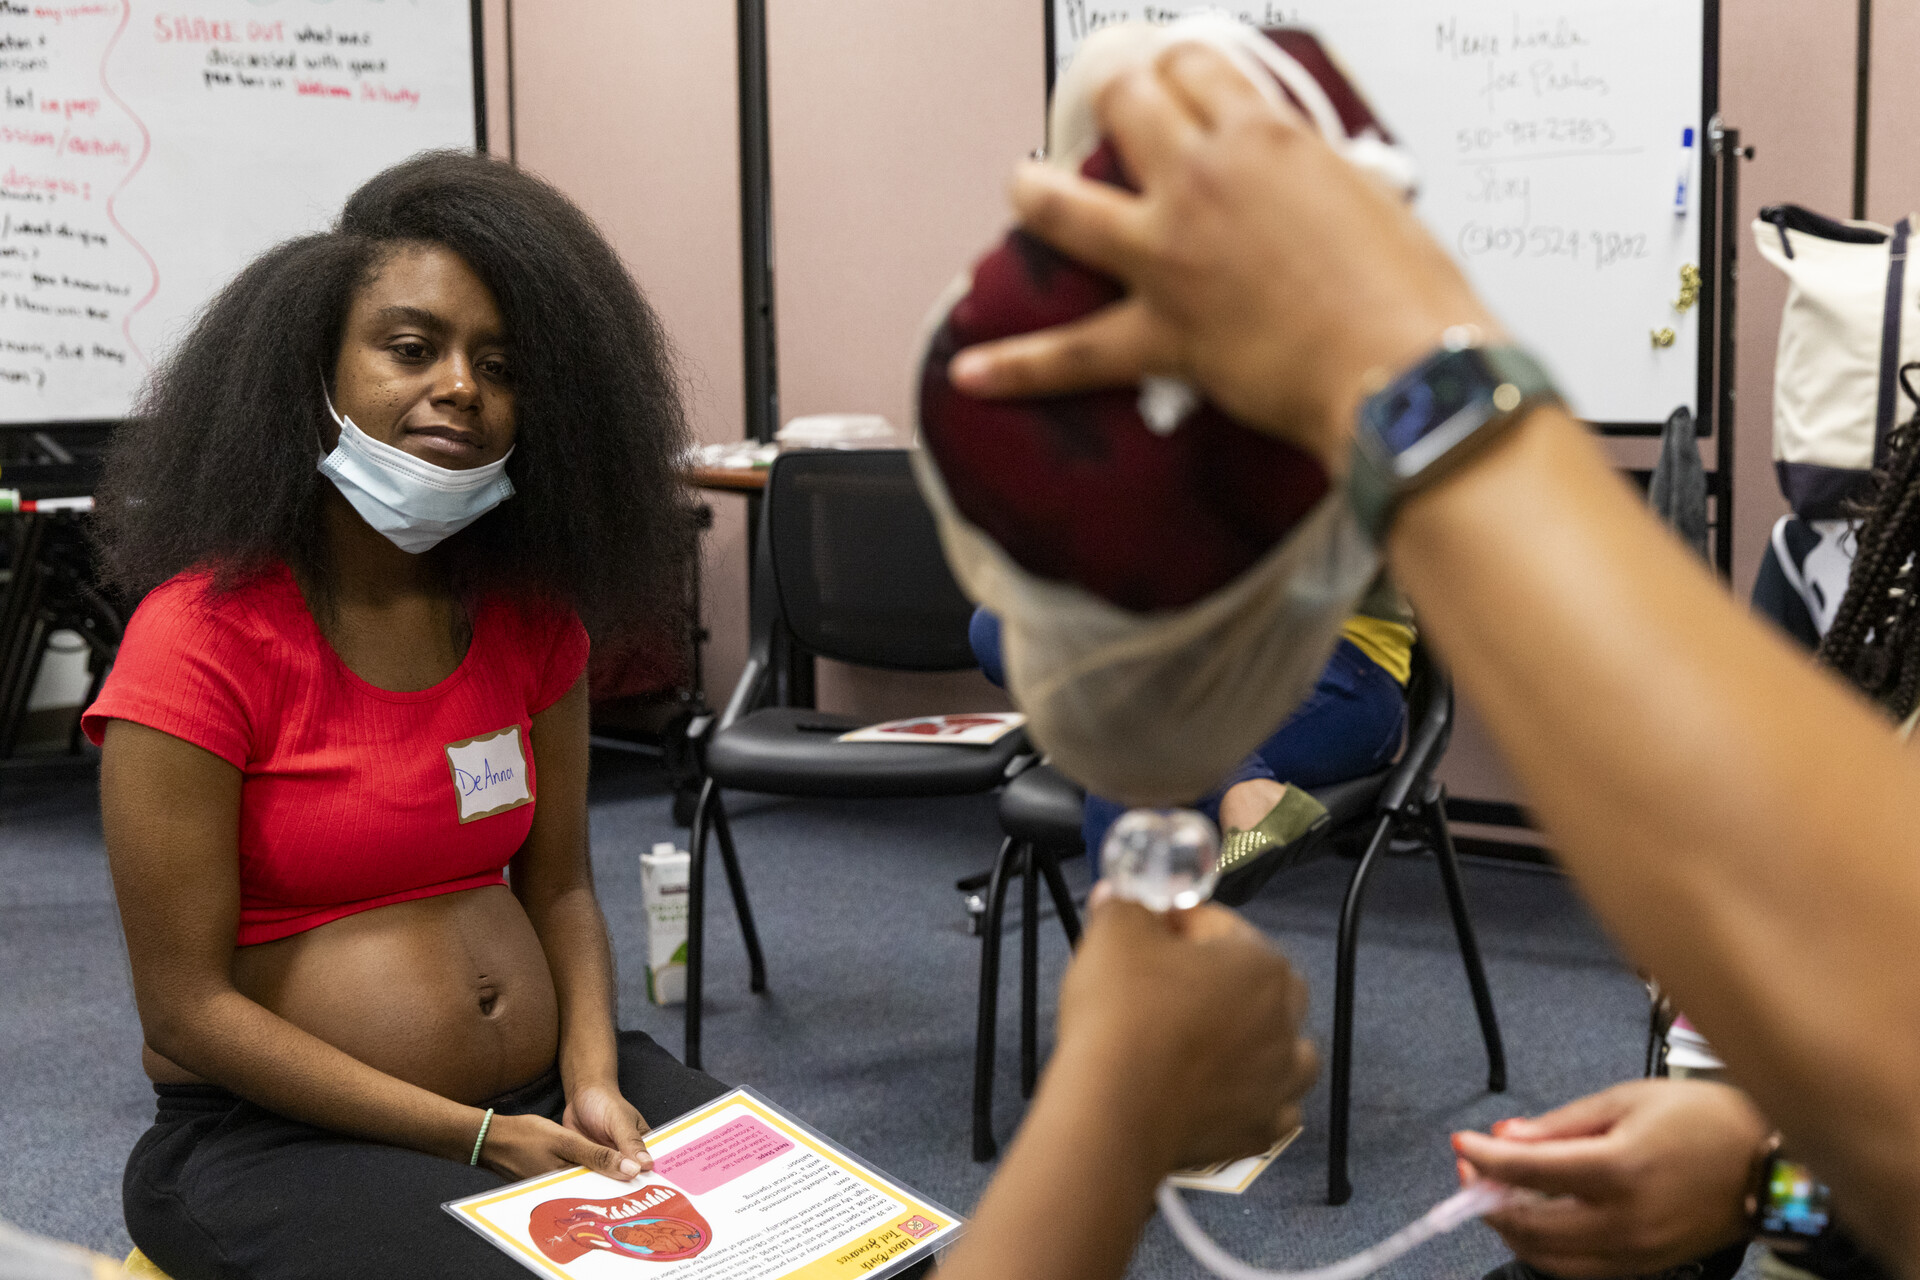 A pregnant African American woman looks on as someone handles a catheter in a room with chairs.